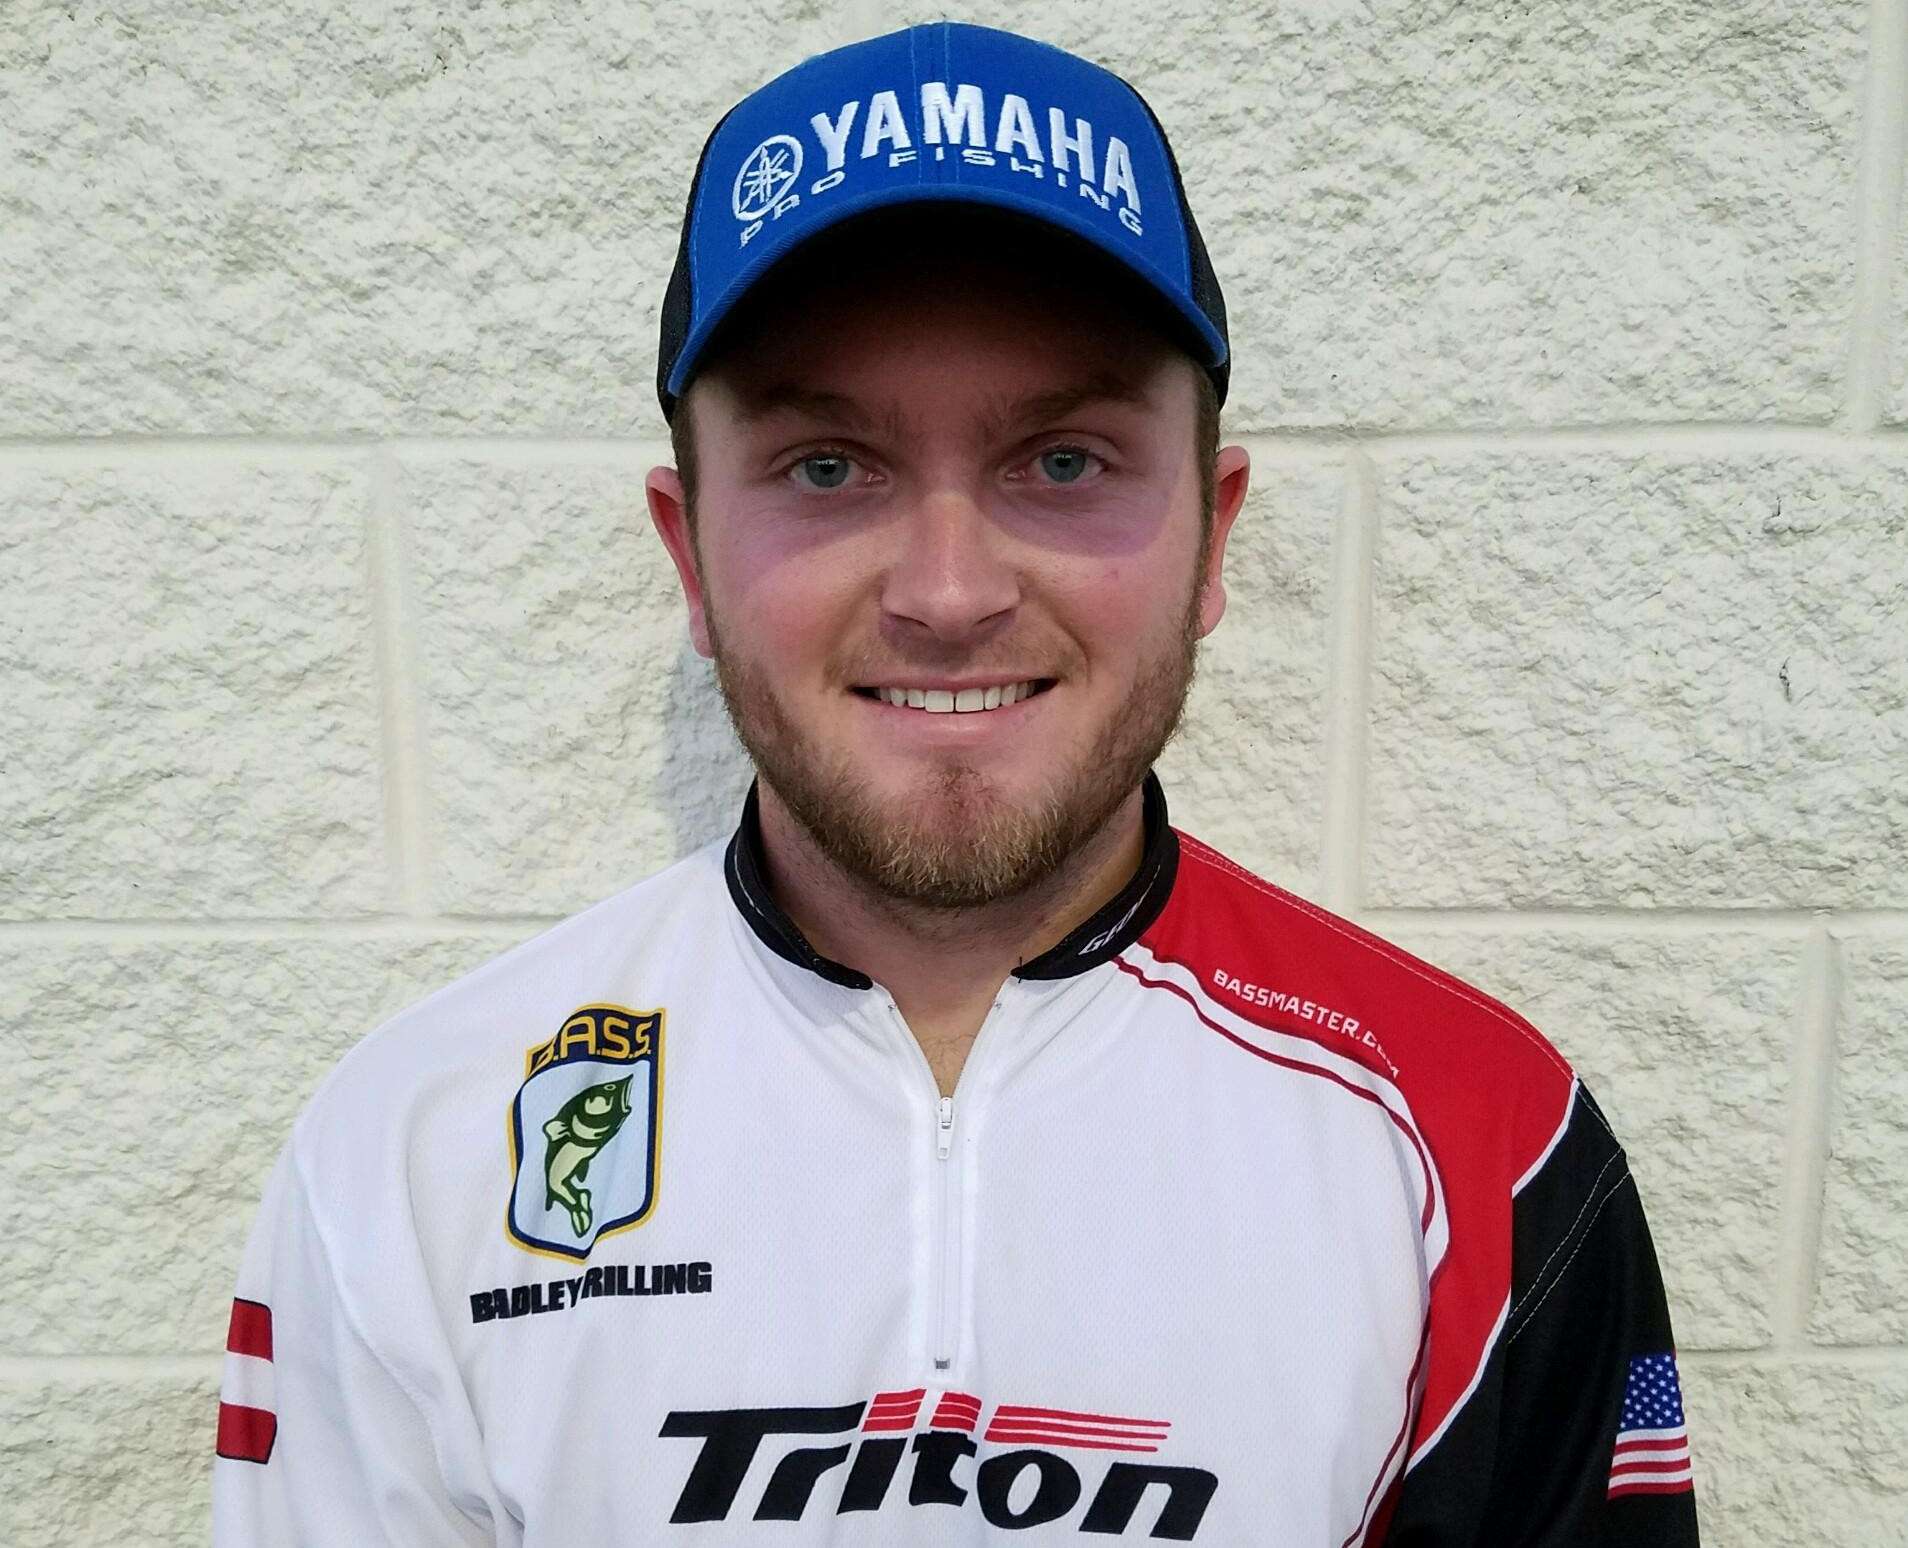 Bradley Rilling <br>
Georgia Nonboater <br>
Bradley Rilling will be competing in his first Nation Championship. Heâs a member of the Clayton County Bassmasters in Georgia, where heâs a plumbing contractor. He likes playing golf and hunting when heâs not fishing. 